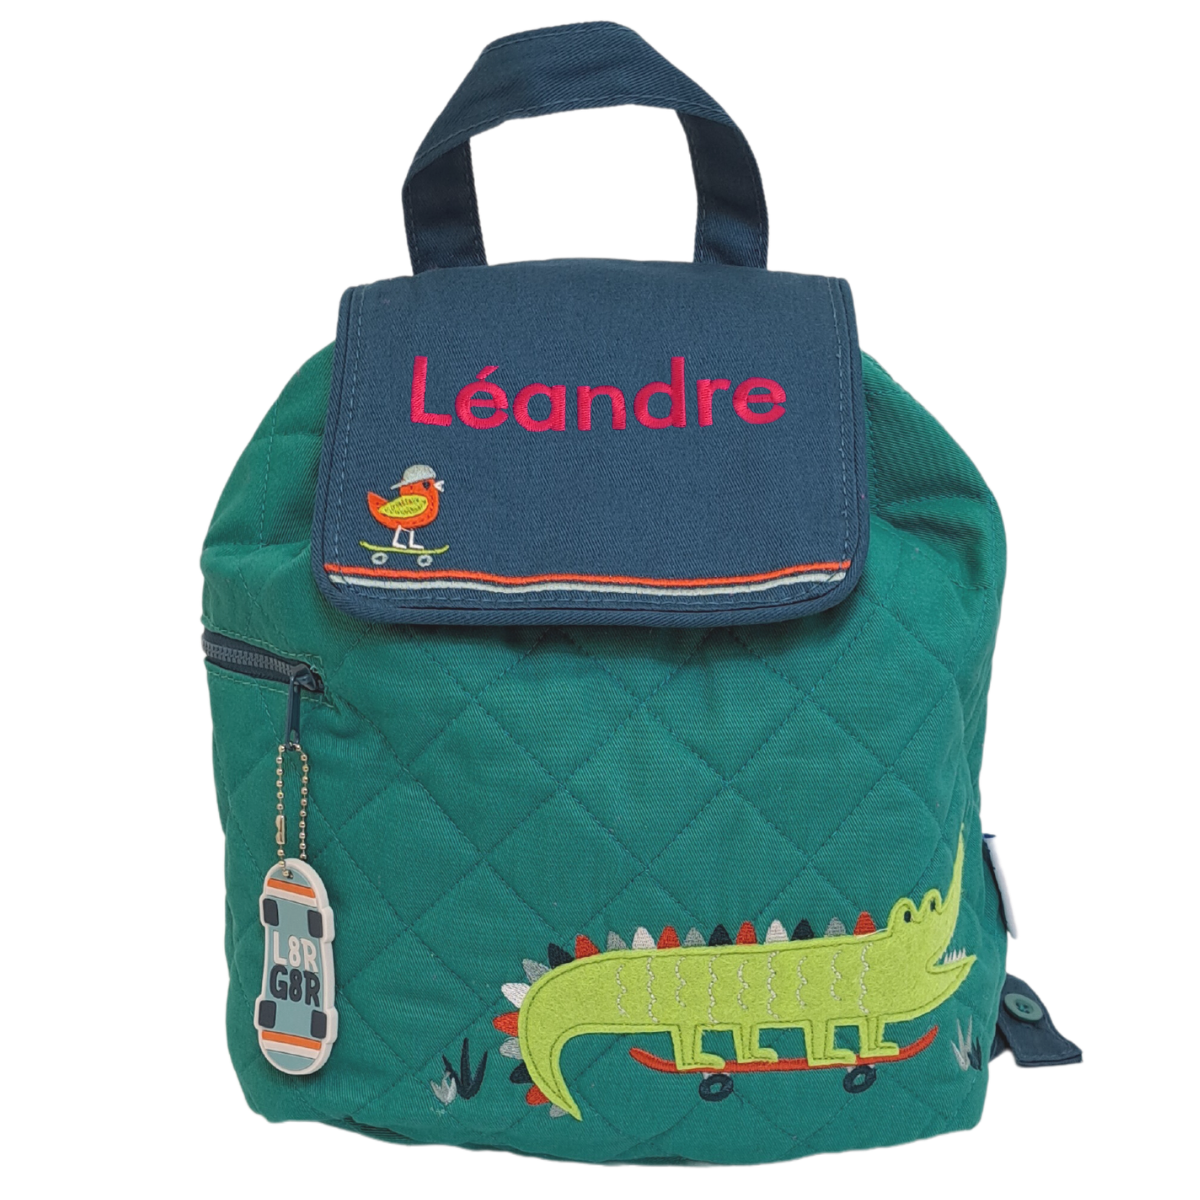 Image of a personalised Stephen Joseph back pack. The back pack has an emerald green main body with a blue closing flap. The bag has an appliqued crocodile on the main body of the bag and a little singing bird on a skateboard on the flap. The bag can be personalised with a name of up to 10 characters which will be embroidered on the flap.